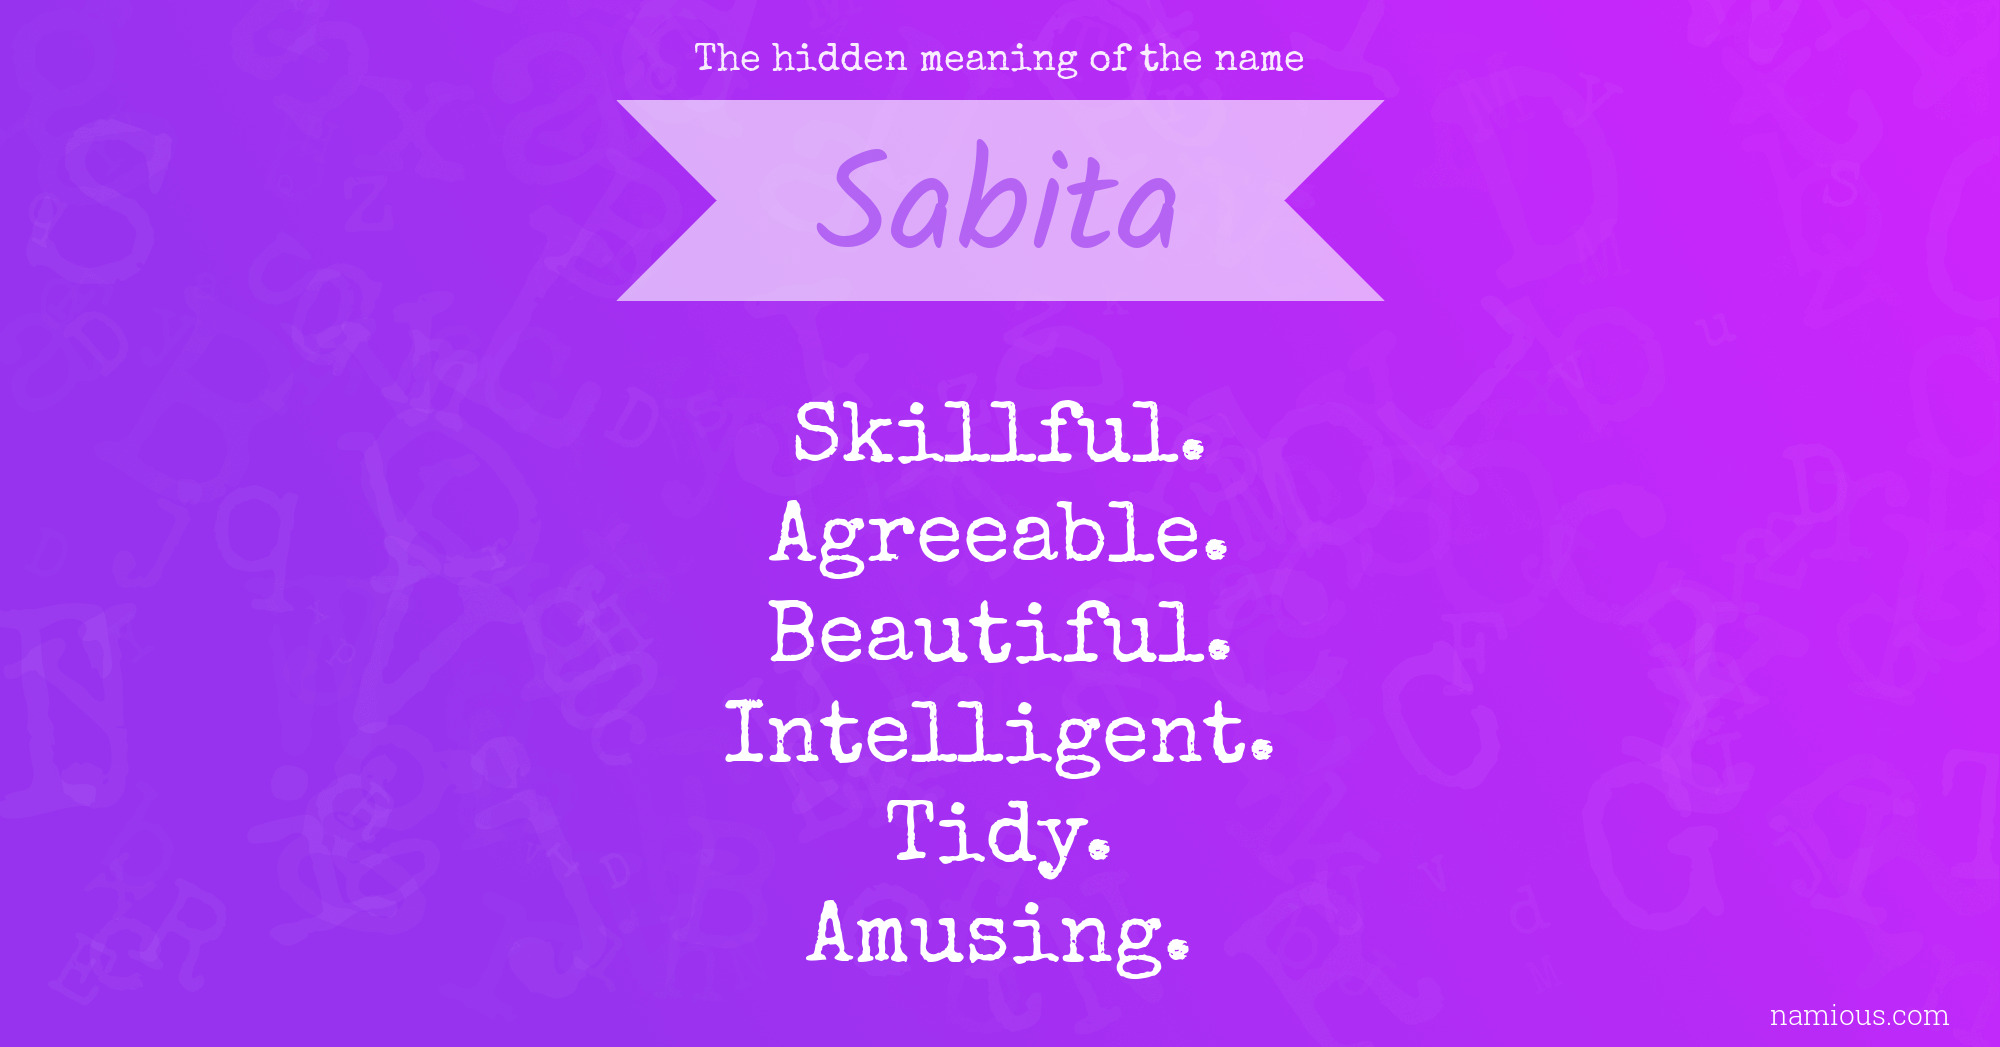 The hidden meaning of the name Sabita